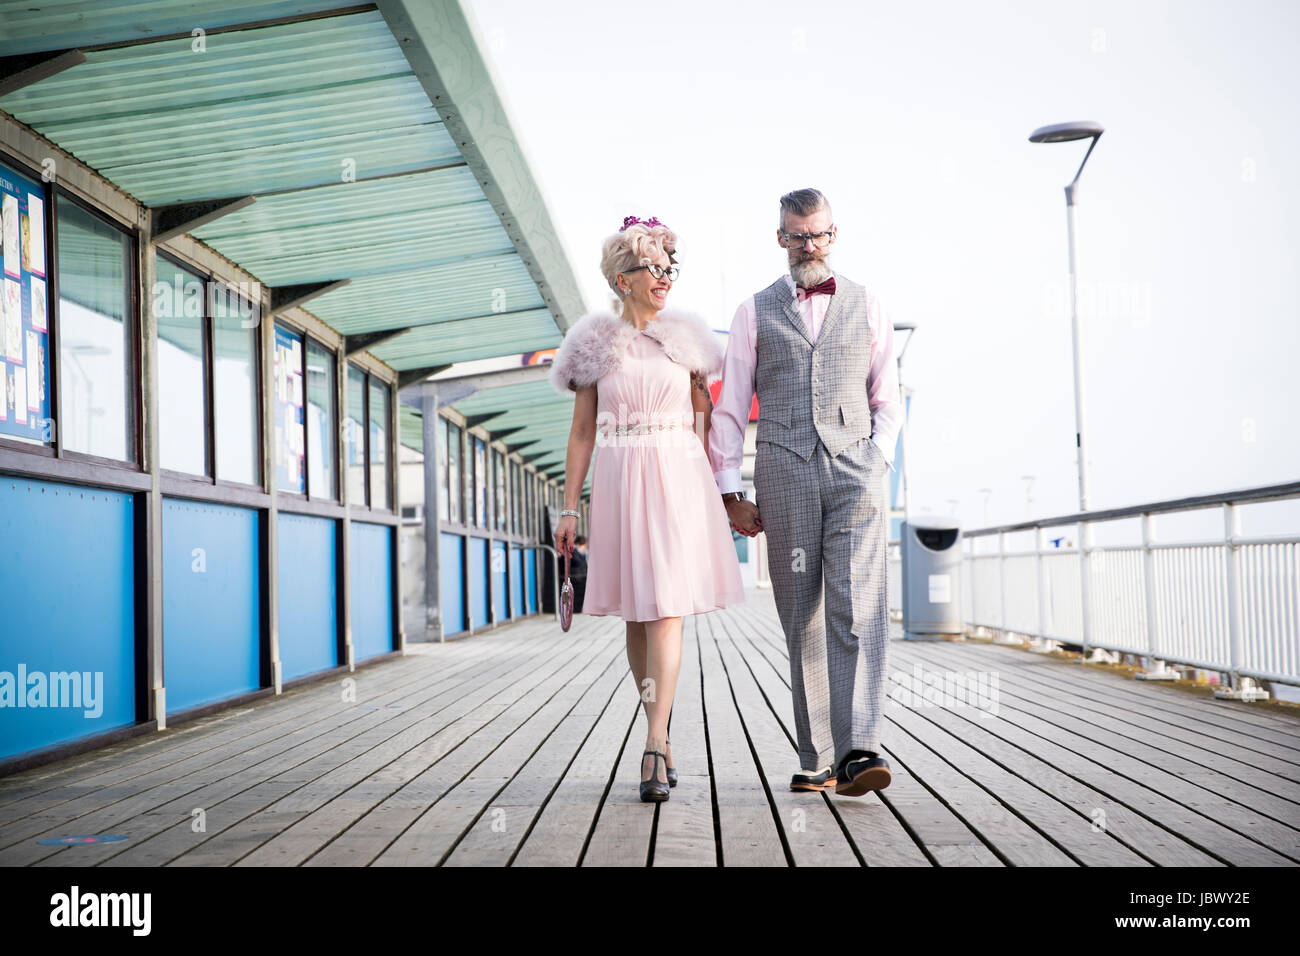 Style années 50 vintage couple strolling and holding hands on pier Banque D'Images